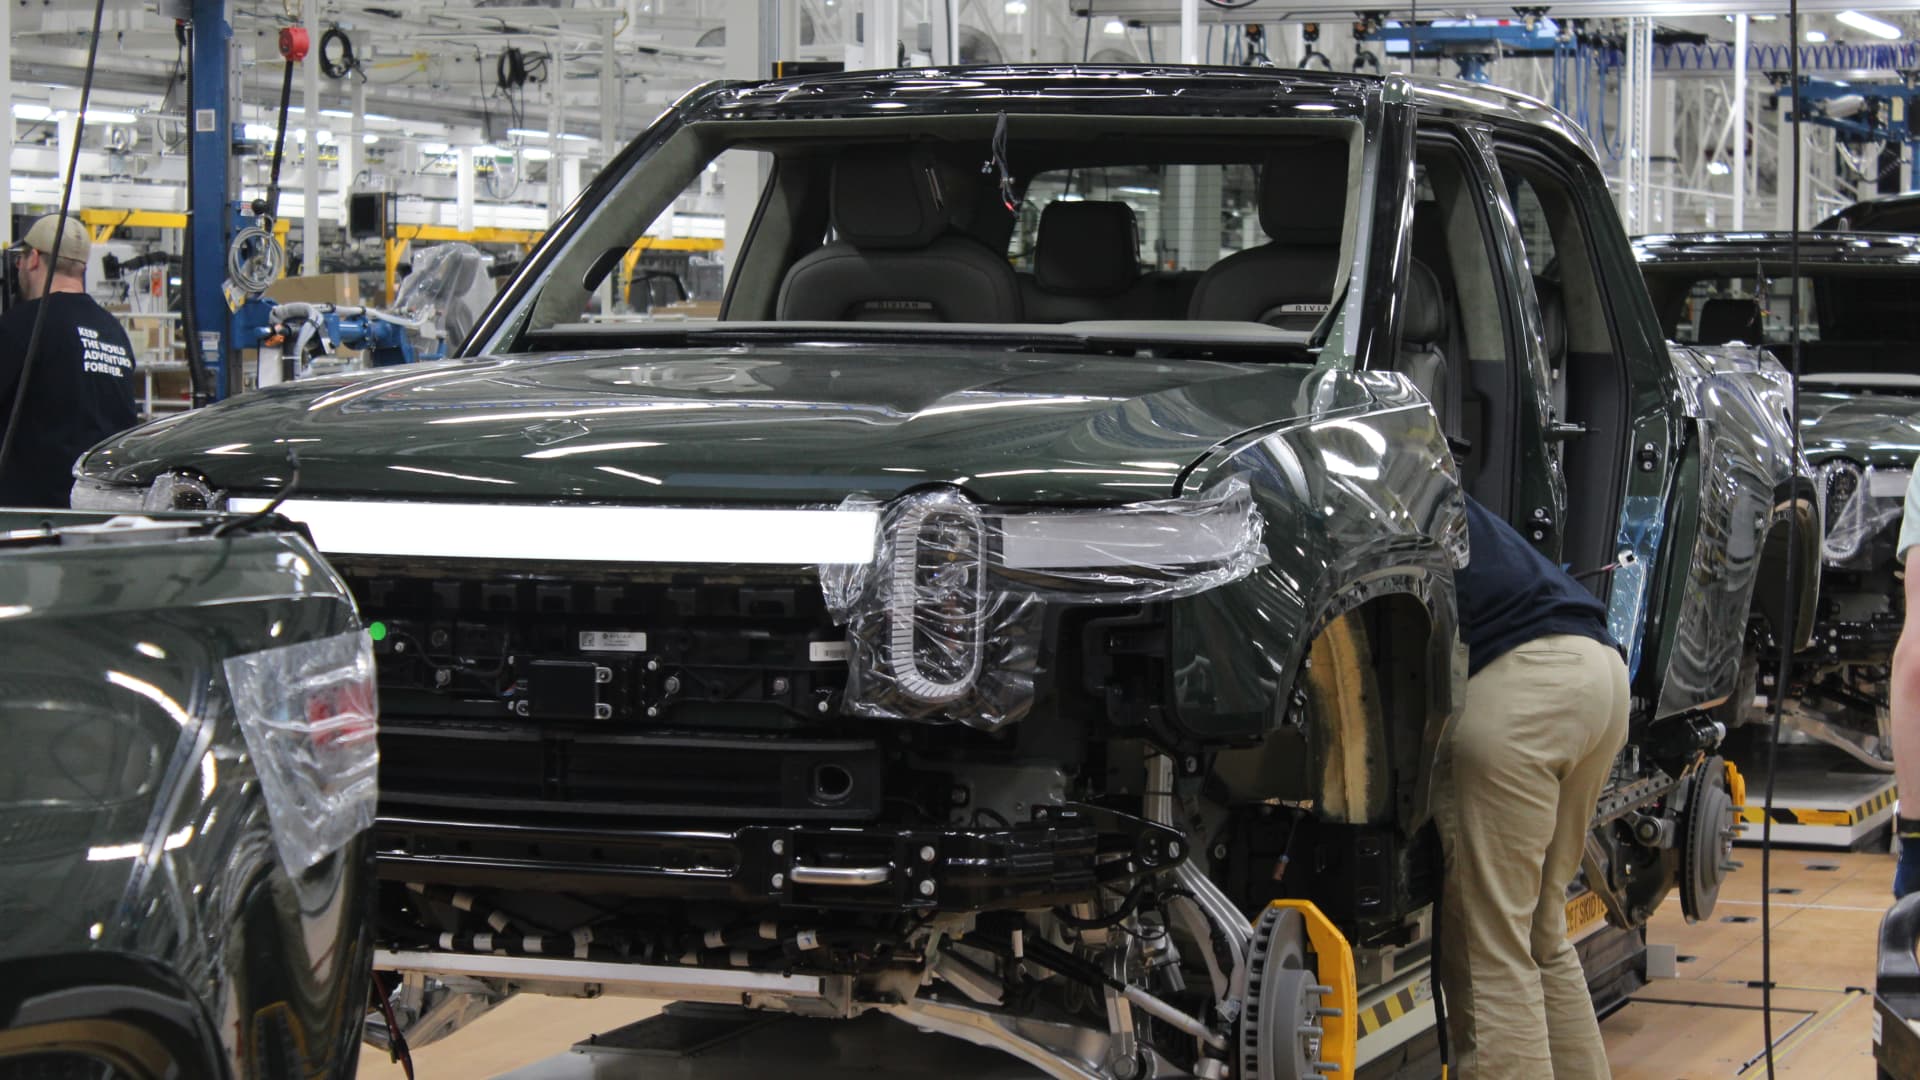 Rivian confirms it’s on track to build 25,000 electric vehicles this year